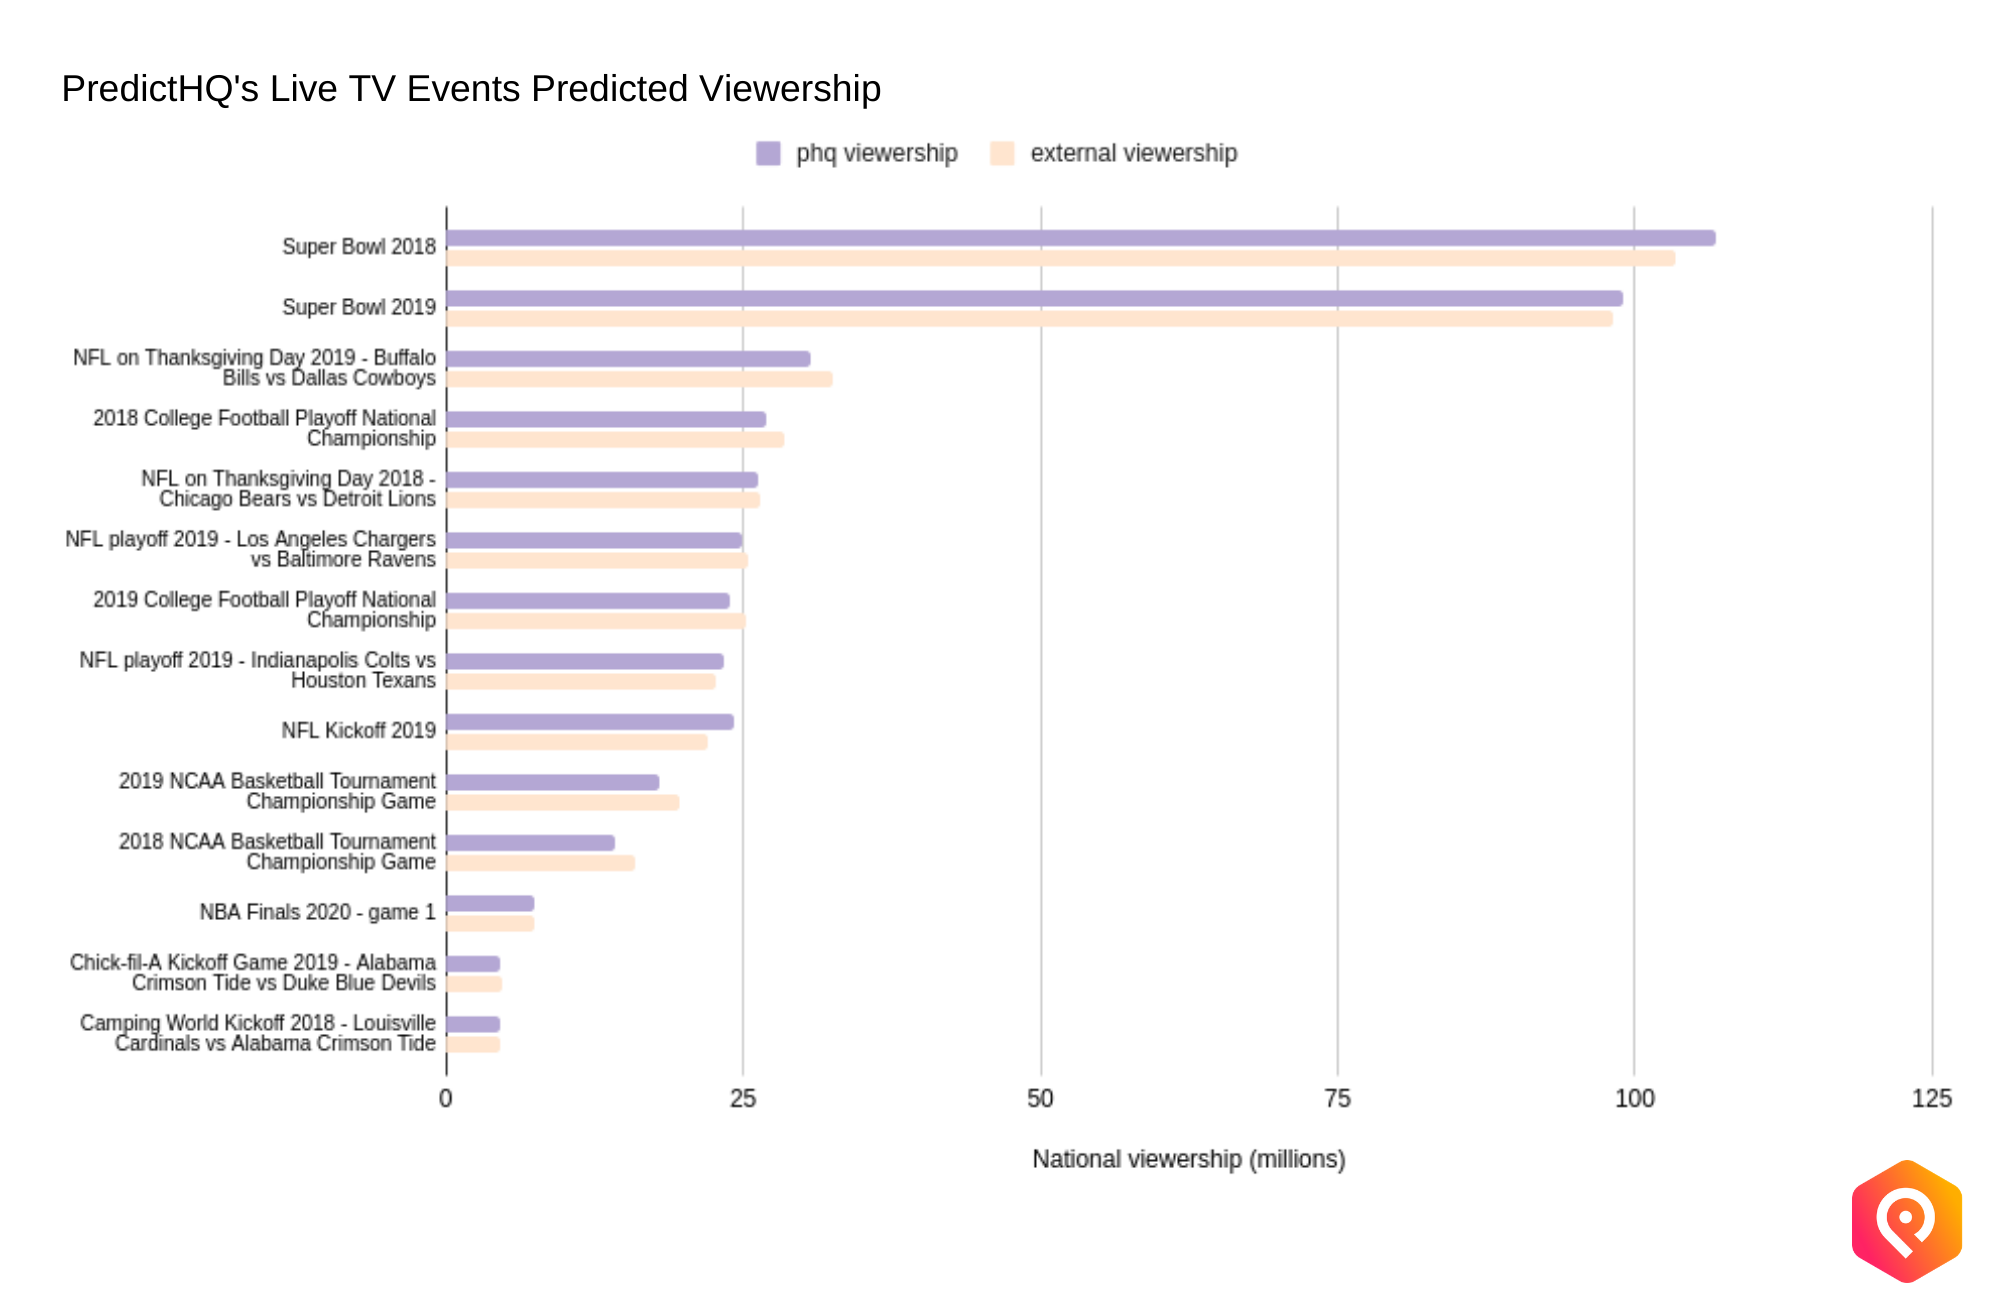 PredictHQ Live TV Events Predicted Viewership